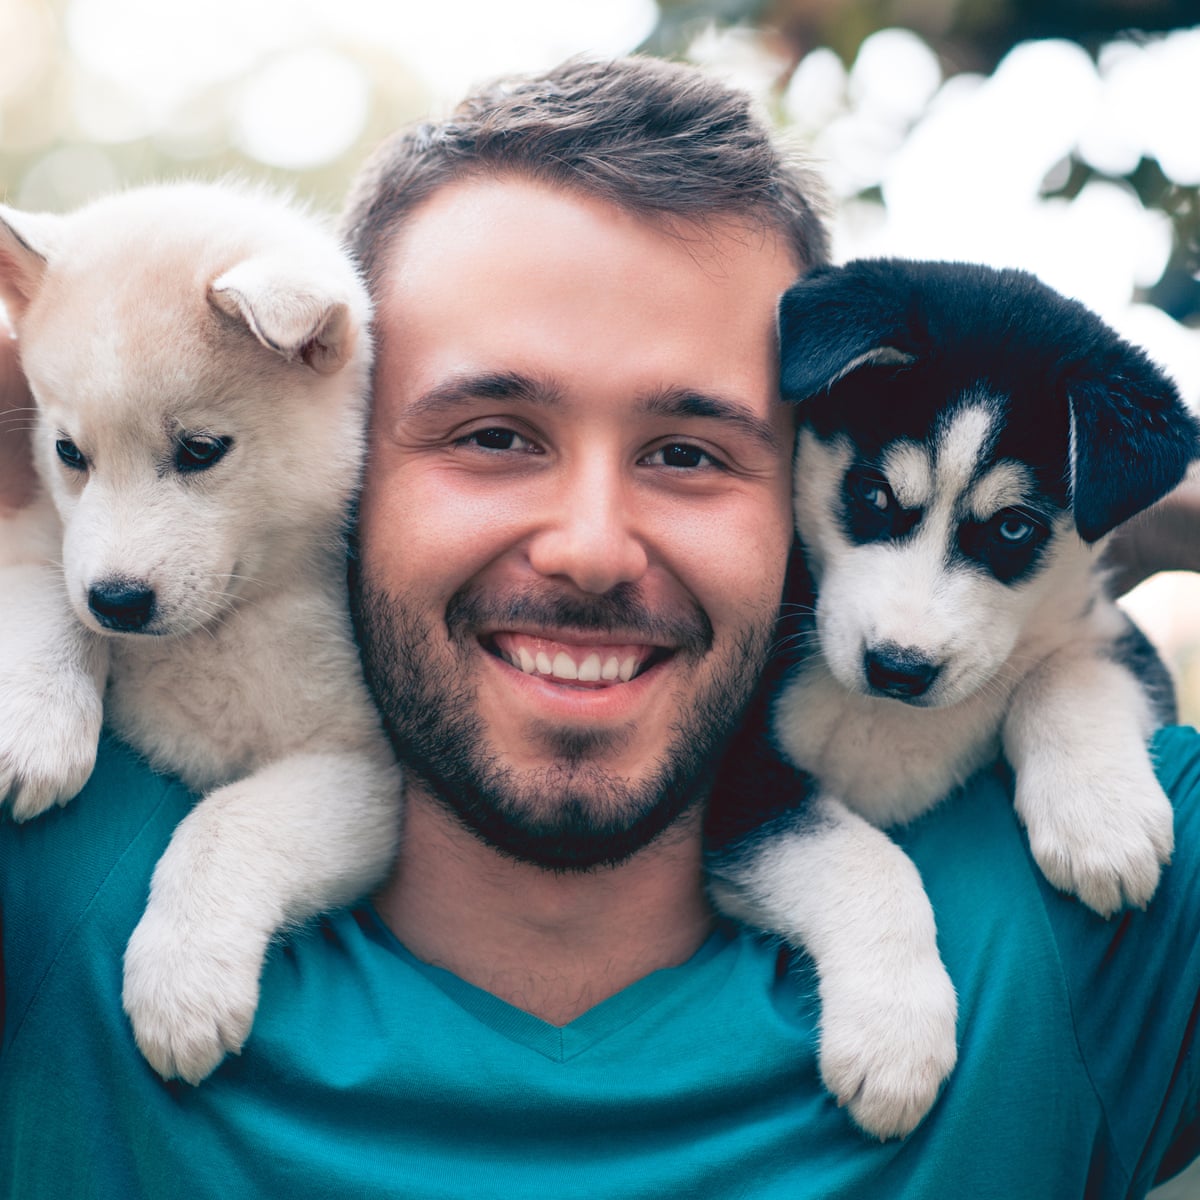 Dogfishing: beware the man who poses with pets on a dating app